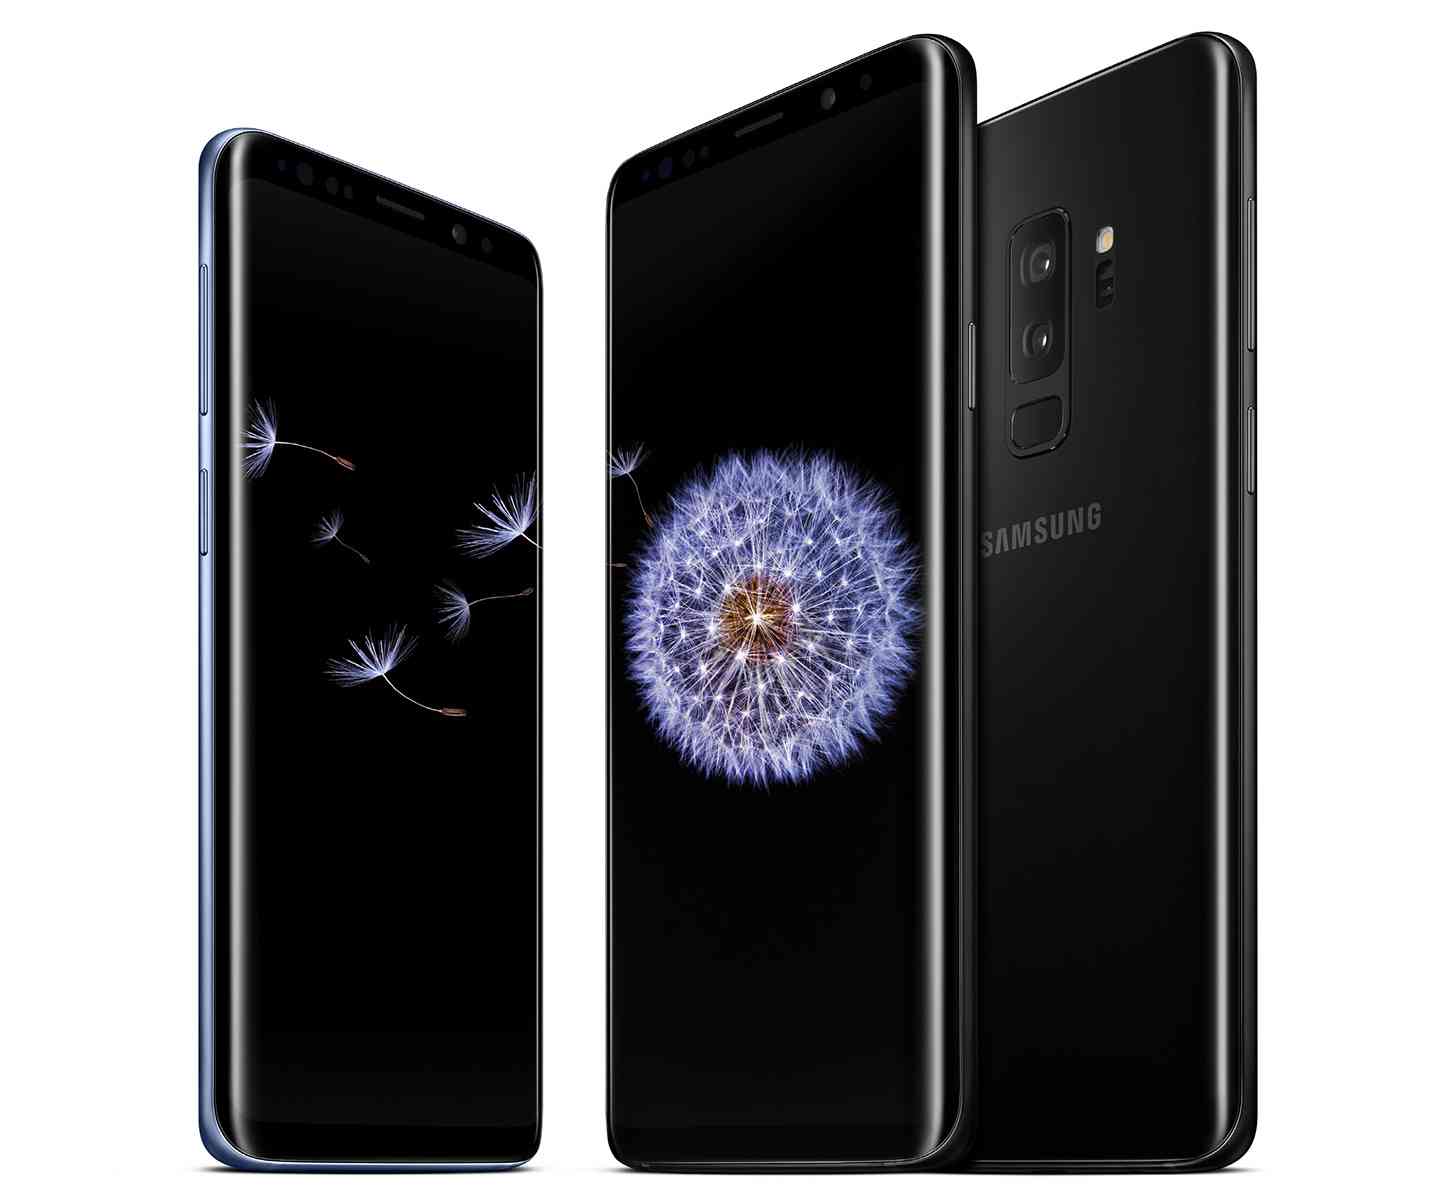 Samsung Galaxy S9+ official